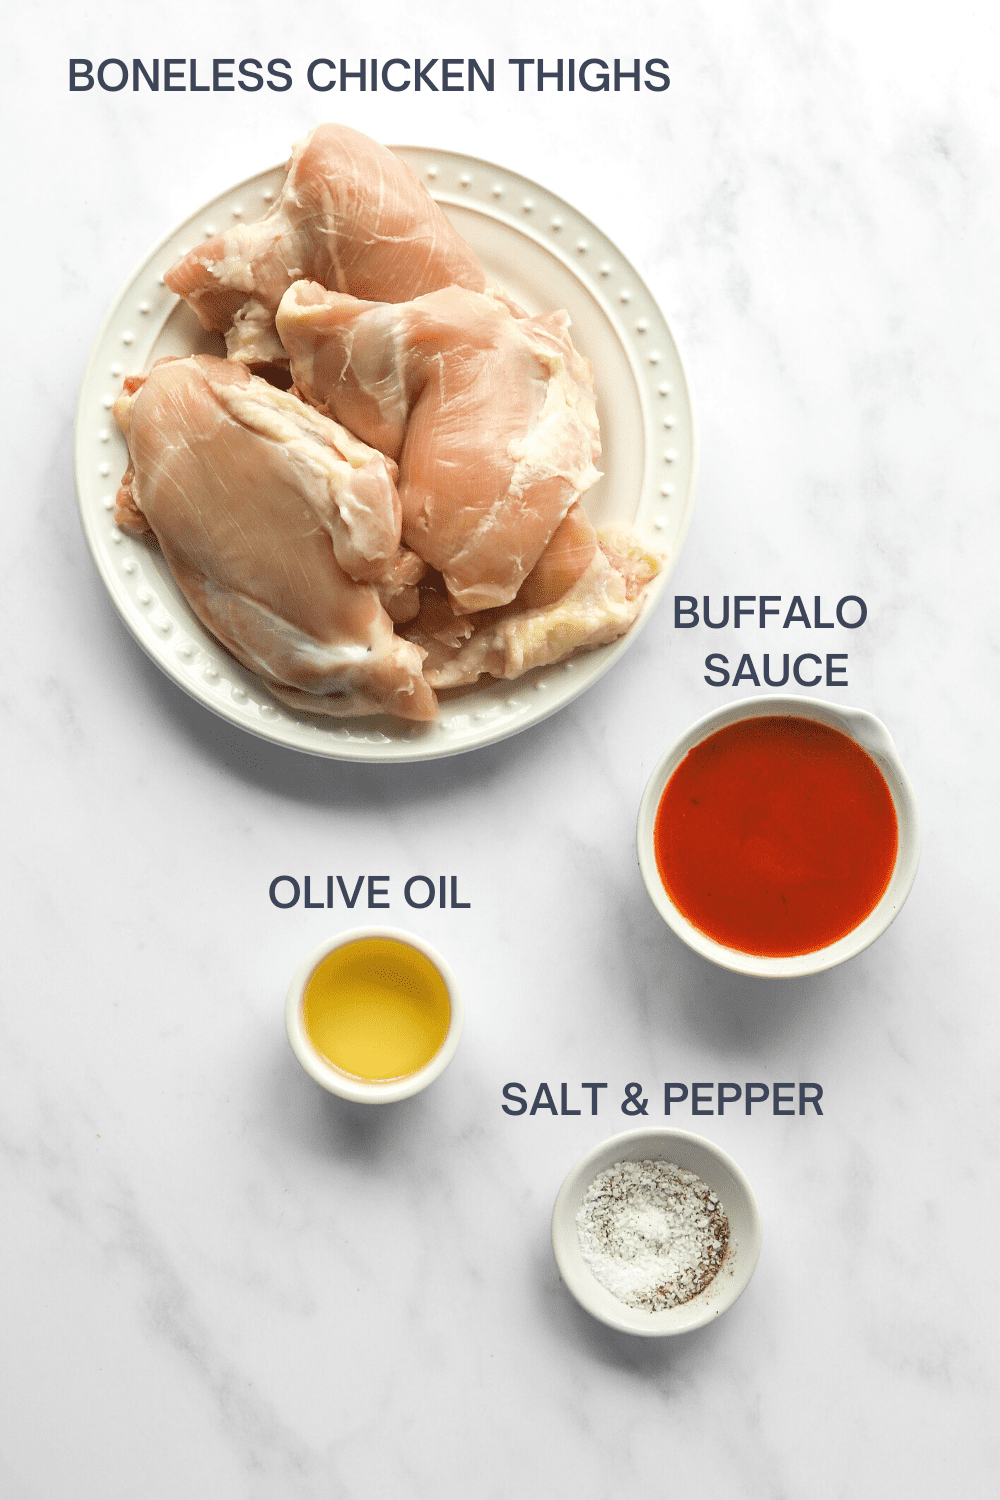 Raw chicken thighs on a round, white plate with a bowl of buffalo sauce, bowl of olive oil and a small bowl of salt in front of it. 